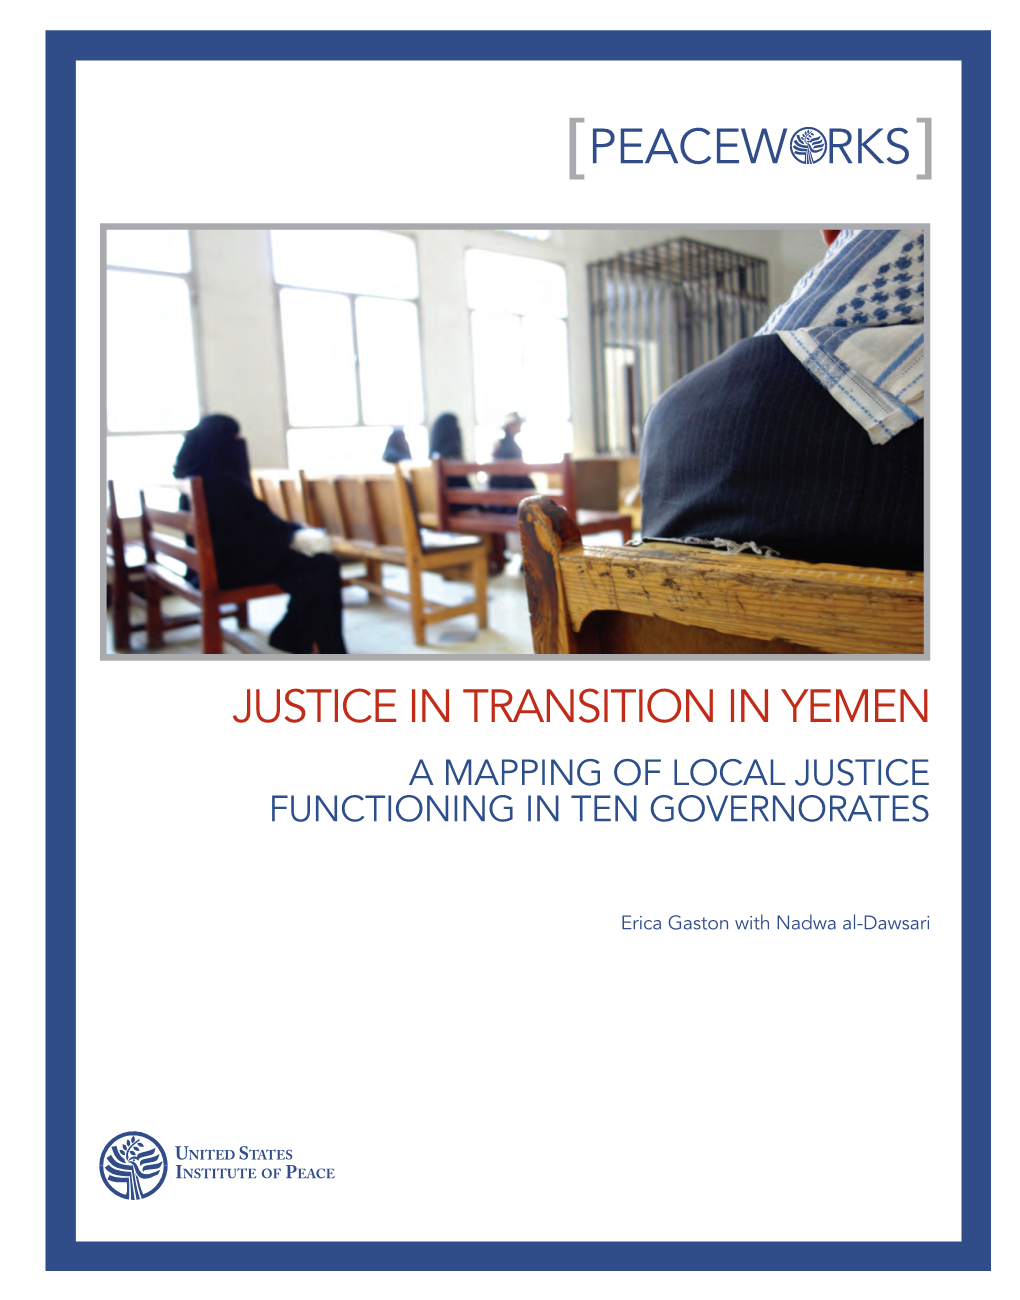 Justice in Transition in Yemen a Mapping of Local Justice Functioning in Ten Governorates